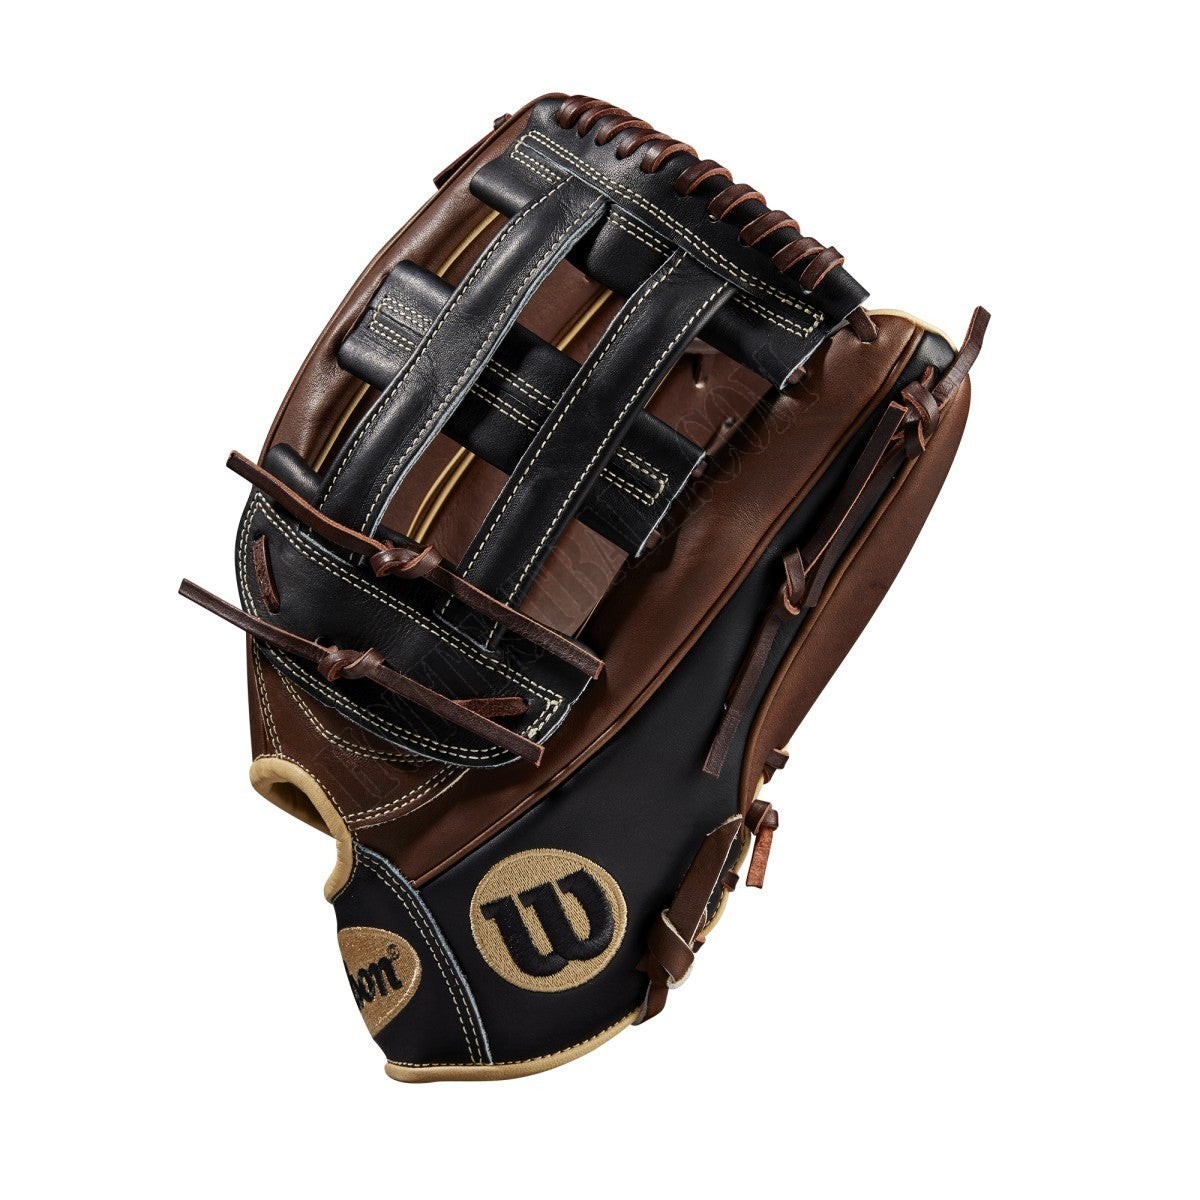 2020 A2000 1799 12.75" Outfield Baseball Glove ● Wilson Promotions - -3